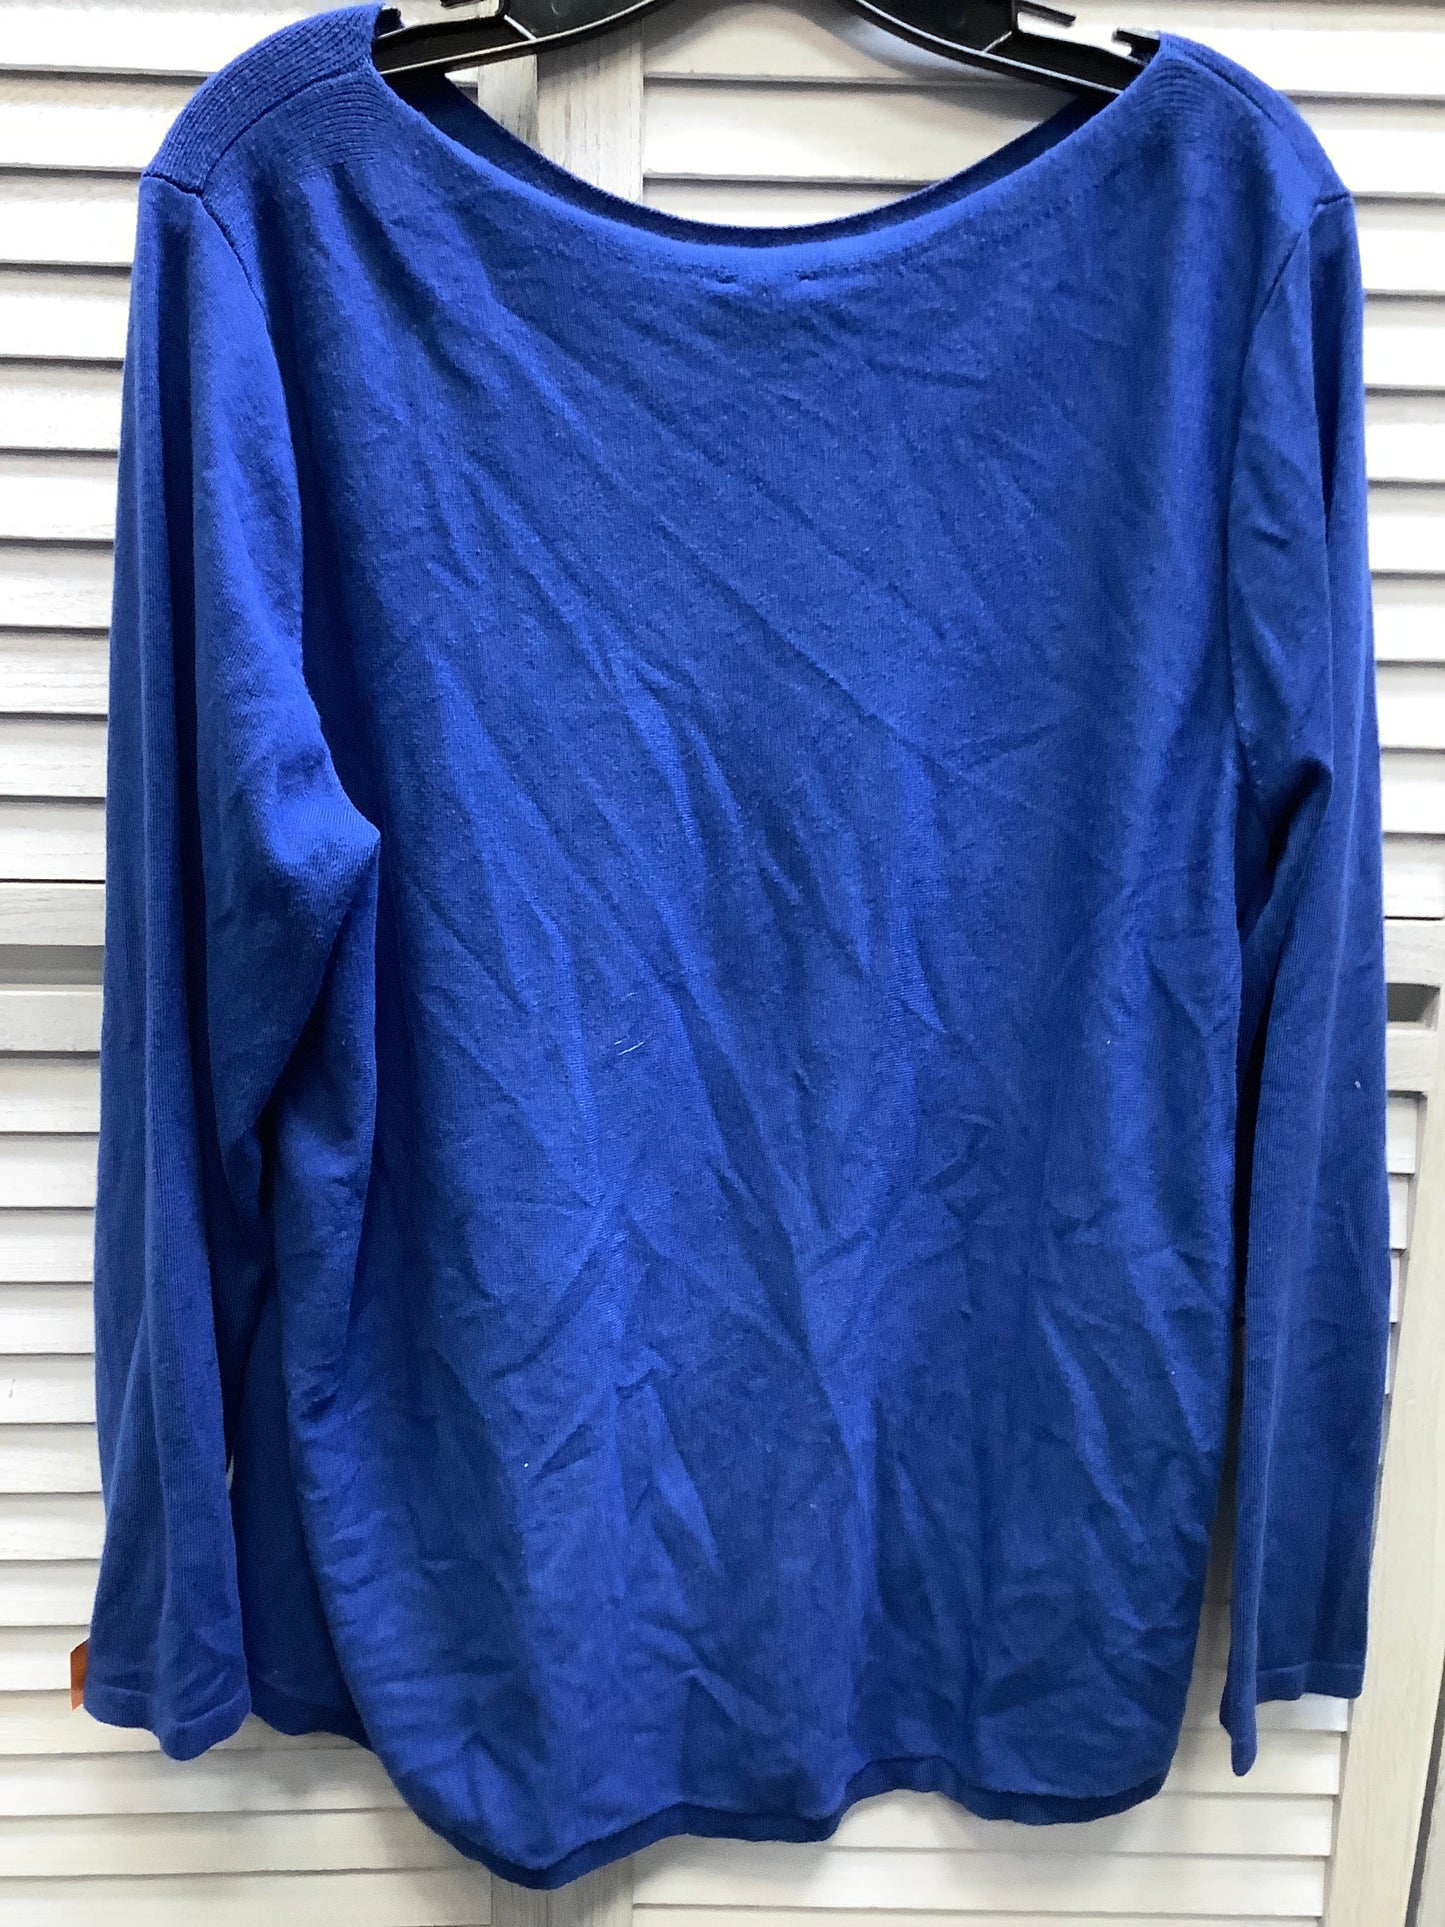 Blue Top Long Sleeve Basic Chicos, Size 3x